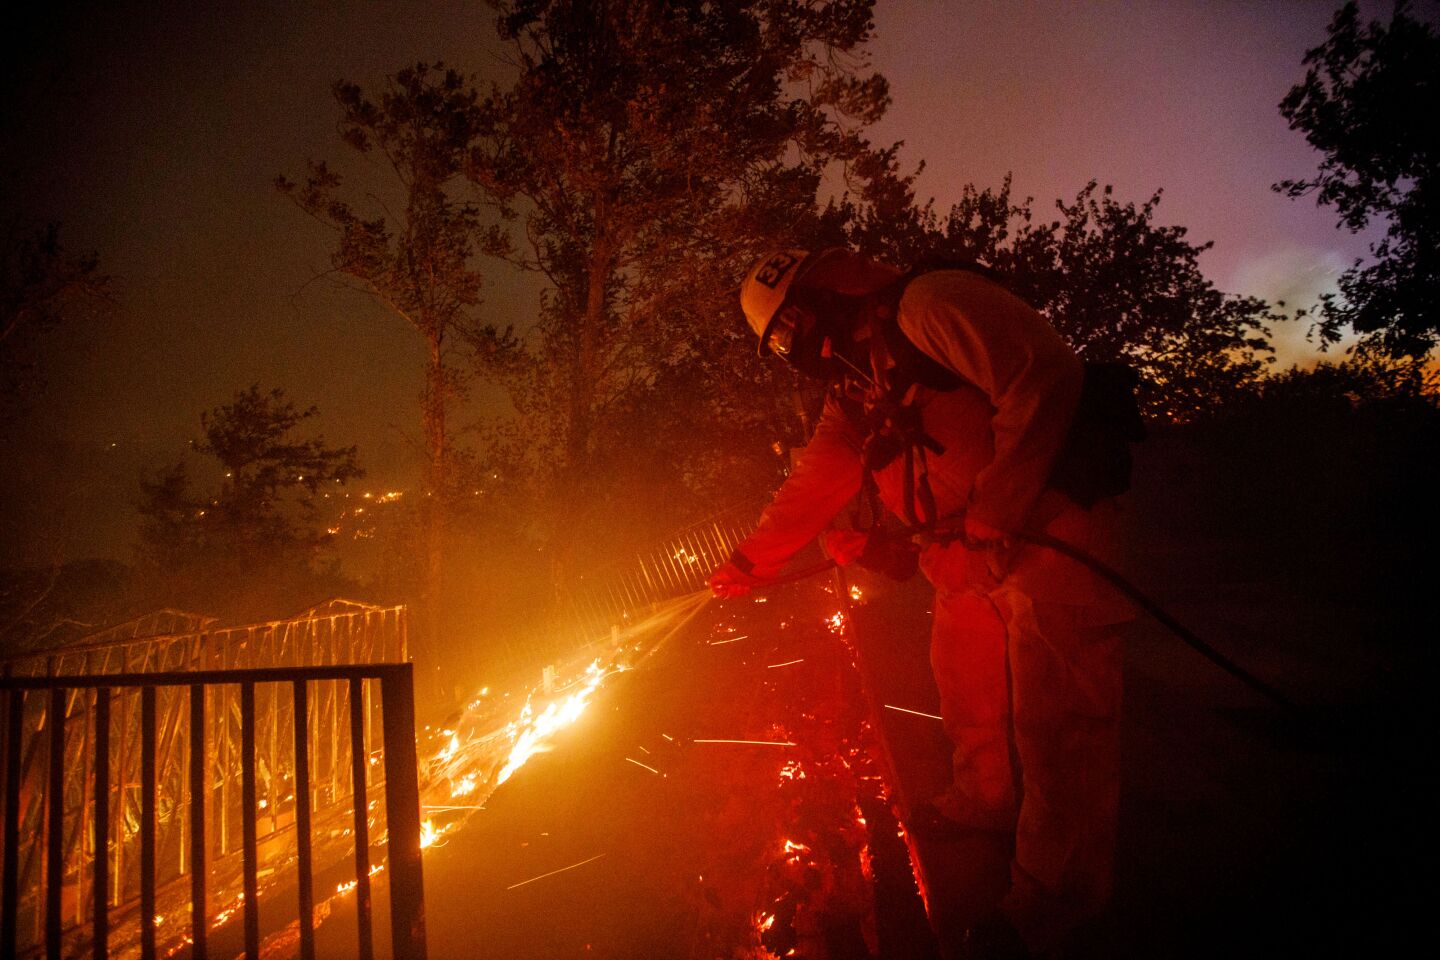 A firefighter uses a garden hose to douse flames in the backyard of a home to keep the Saddleridge fire from spreading in Porter Ranch.